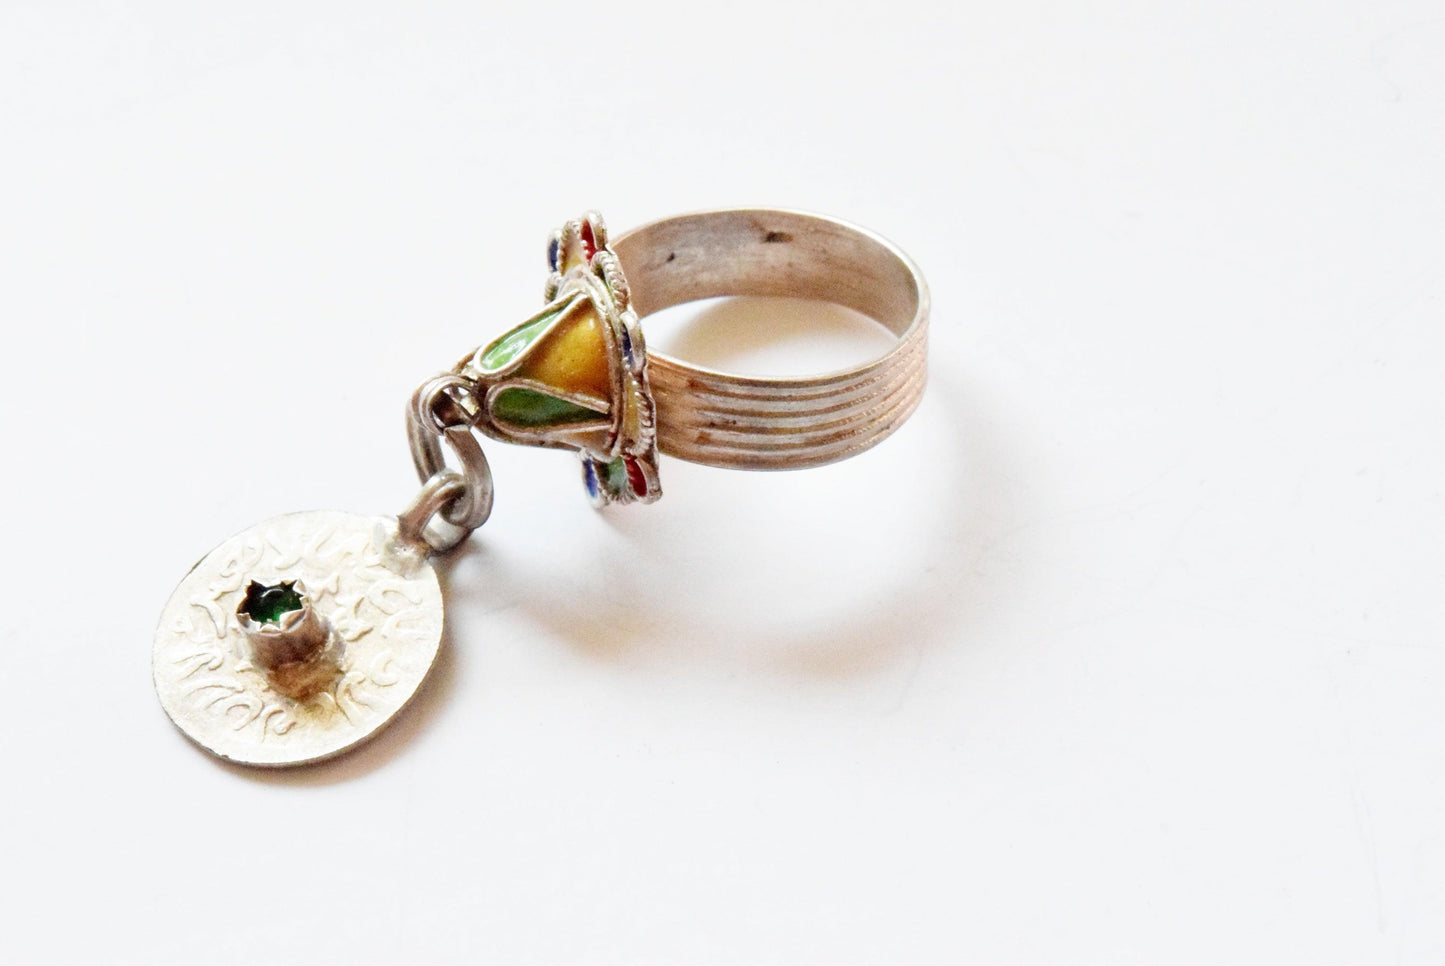 Silver and Enamel Moroccan Berber Ring with Coin - Anteeka